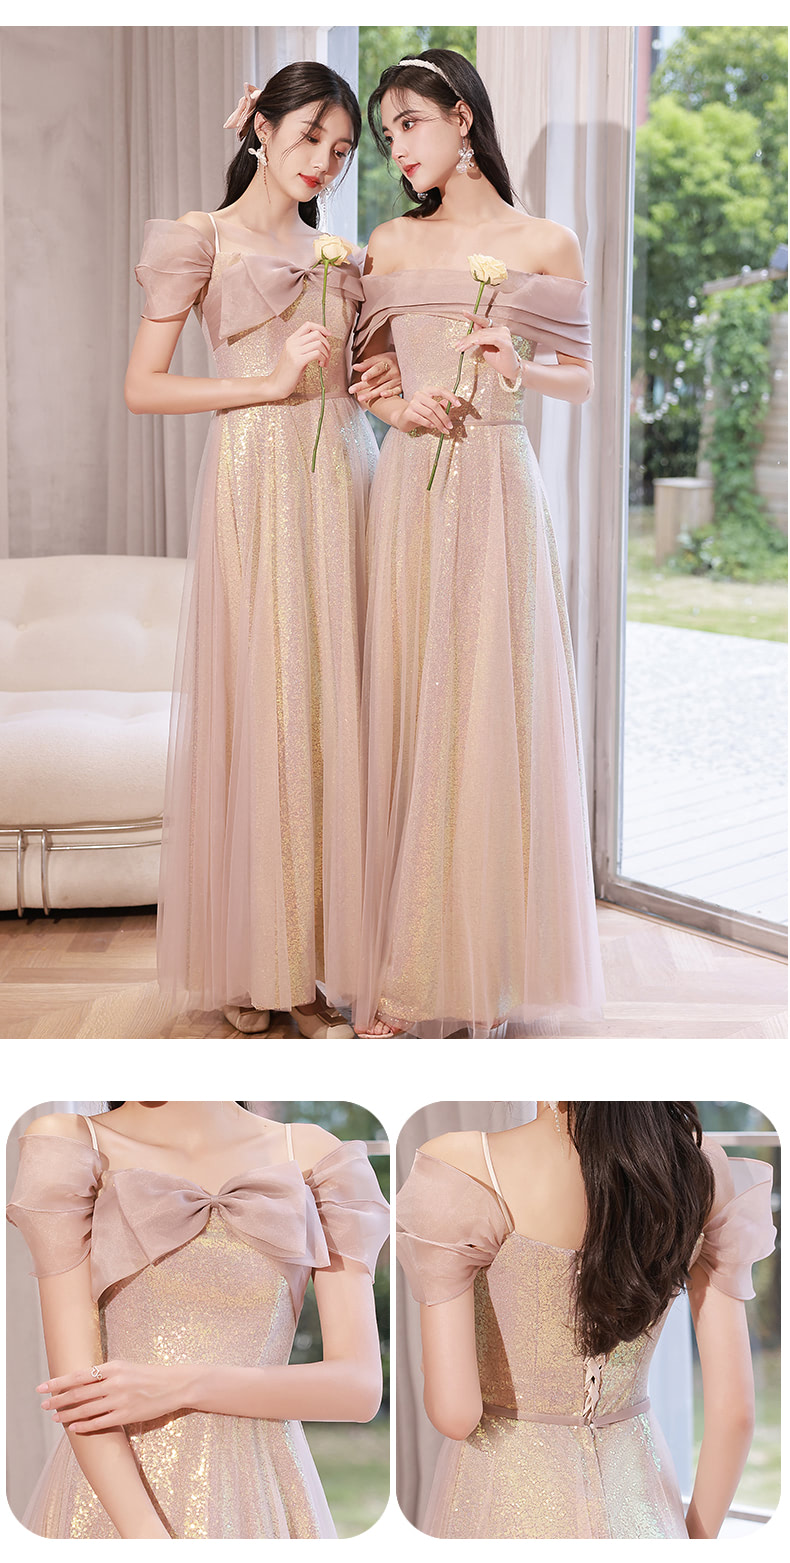 Fairy-Starry-Pink-Slim-Bridesmaid-Long-Dress-Wedding-Party-Gown19.jpg